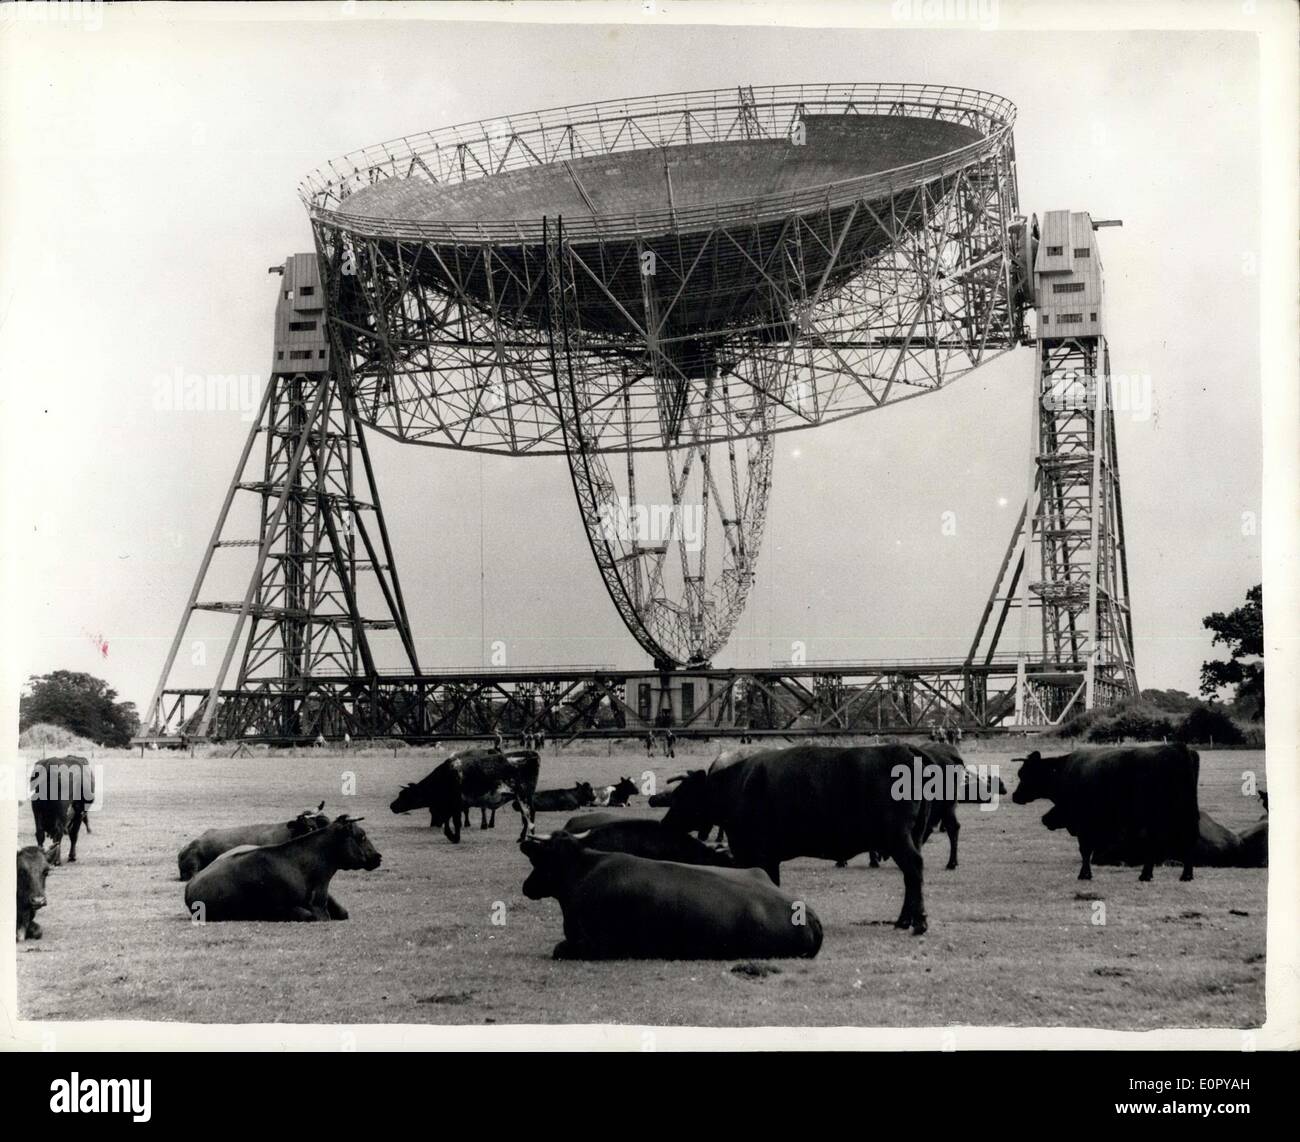 Jun. 26, 1957 - Largest Radio Telescope In The World For Scientific Research Into The Atmosphere: the largest Radio Telescope in the World was shows to the Press yesterday for the firer time. Built at Jordell Bank, Cheshire for Manchester University - at a cost of about 50,000 - it consists of a gigantic copper mesh bowl Weighing 50 tone and suspended between two towers 180 ft. high. Funds for its construction were provideby the Department od Scientific and Industrial Research and the Nuffield Foundation. The diameter of theb bowl 250ft. - and the searil masts are 621/2 ft. high Stock Photo